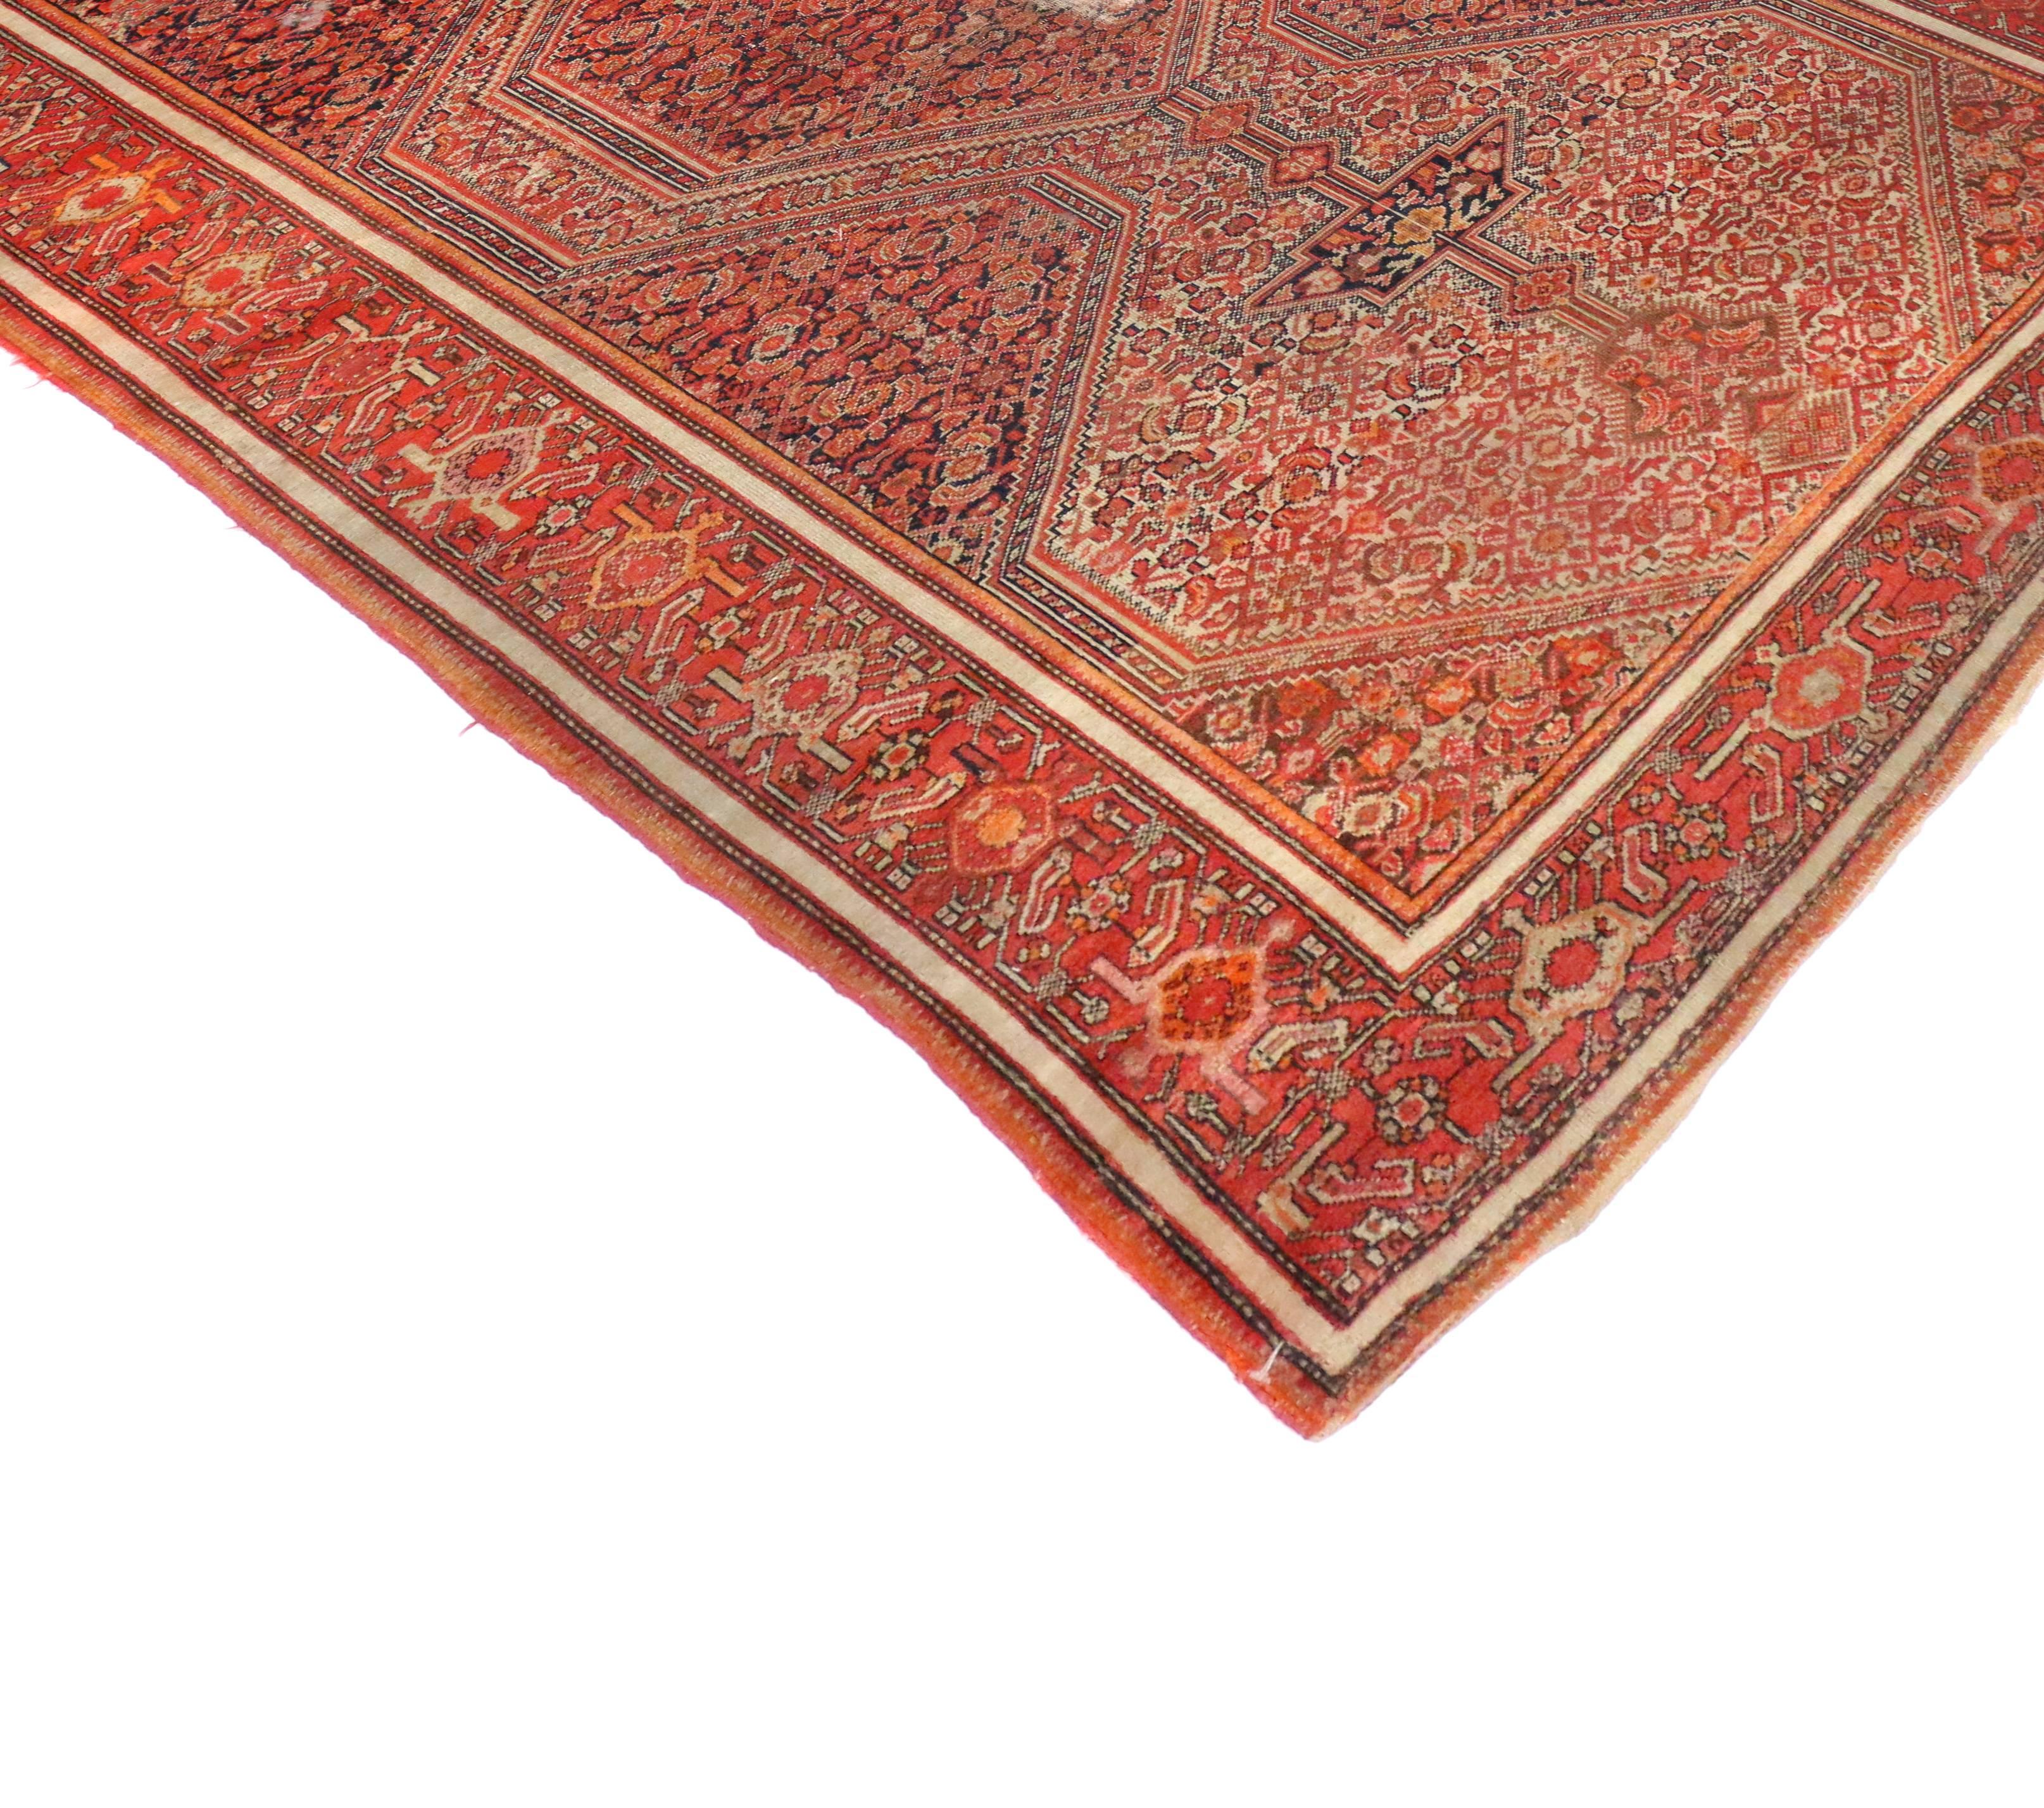 73287, an antique Persian Malayer rug. This hand-knotted wool antique Persian Malayer rug features a central geometric medallion flanked by two smaller versions to each side, rendered in red, orange pumpkin, midnight navy blue and beige. Medallions